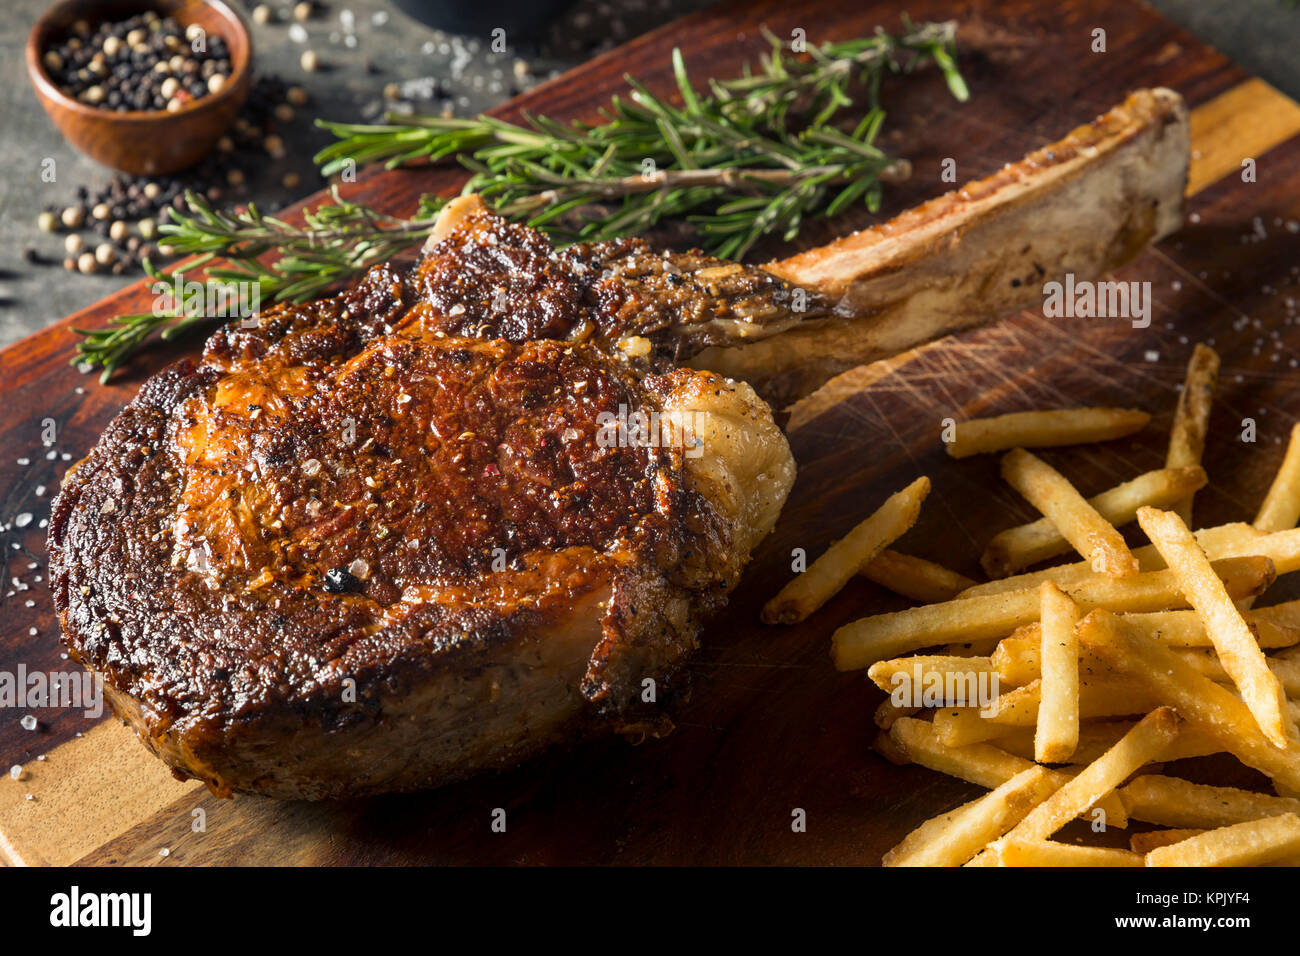 Cooked Grass Fed Tomahawk Steaks with Fries and Rosemary Stock Photo